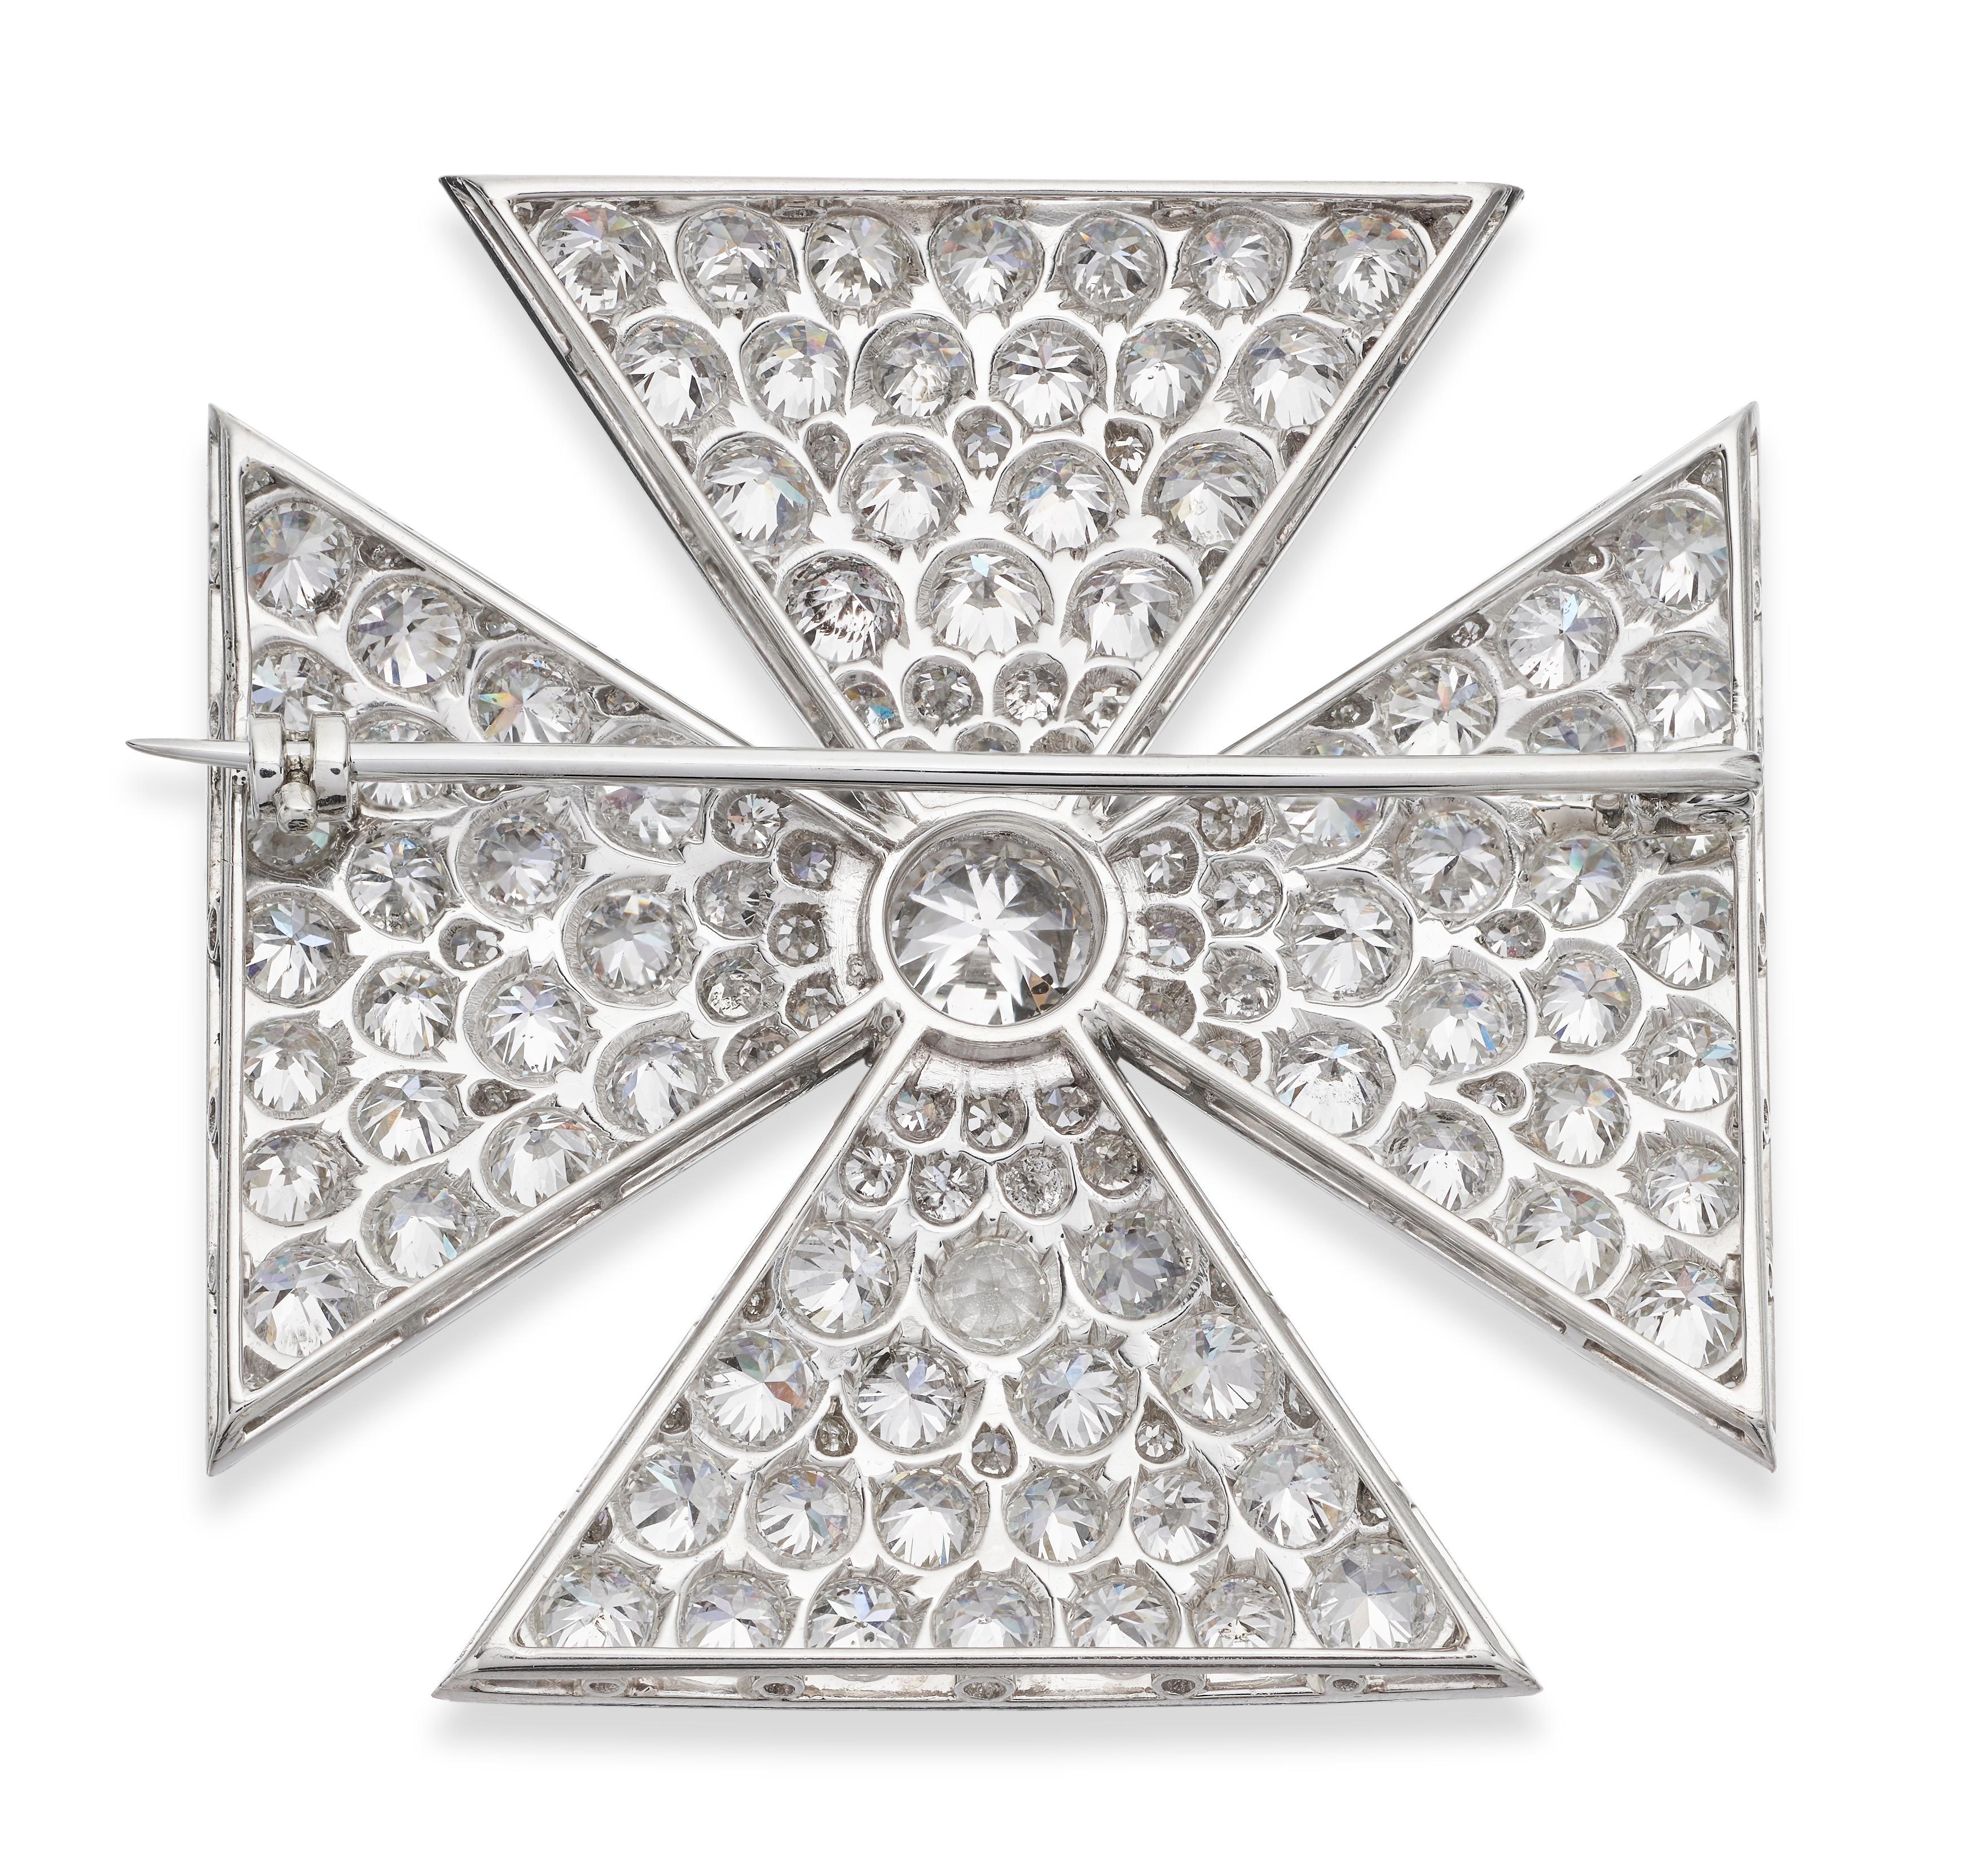 Exceptional diamond Maltese cross brooch, set in platinum. Old European cut diamonds dazzle from every angle in this brooch. 
1 x Center diamond, approximate weight 1.20 carats
The rest diamonds approximate weight 11.0 carats, assessed colour H/I,